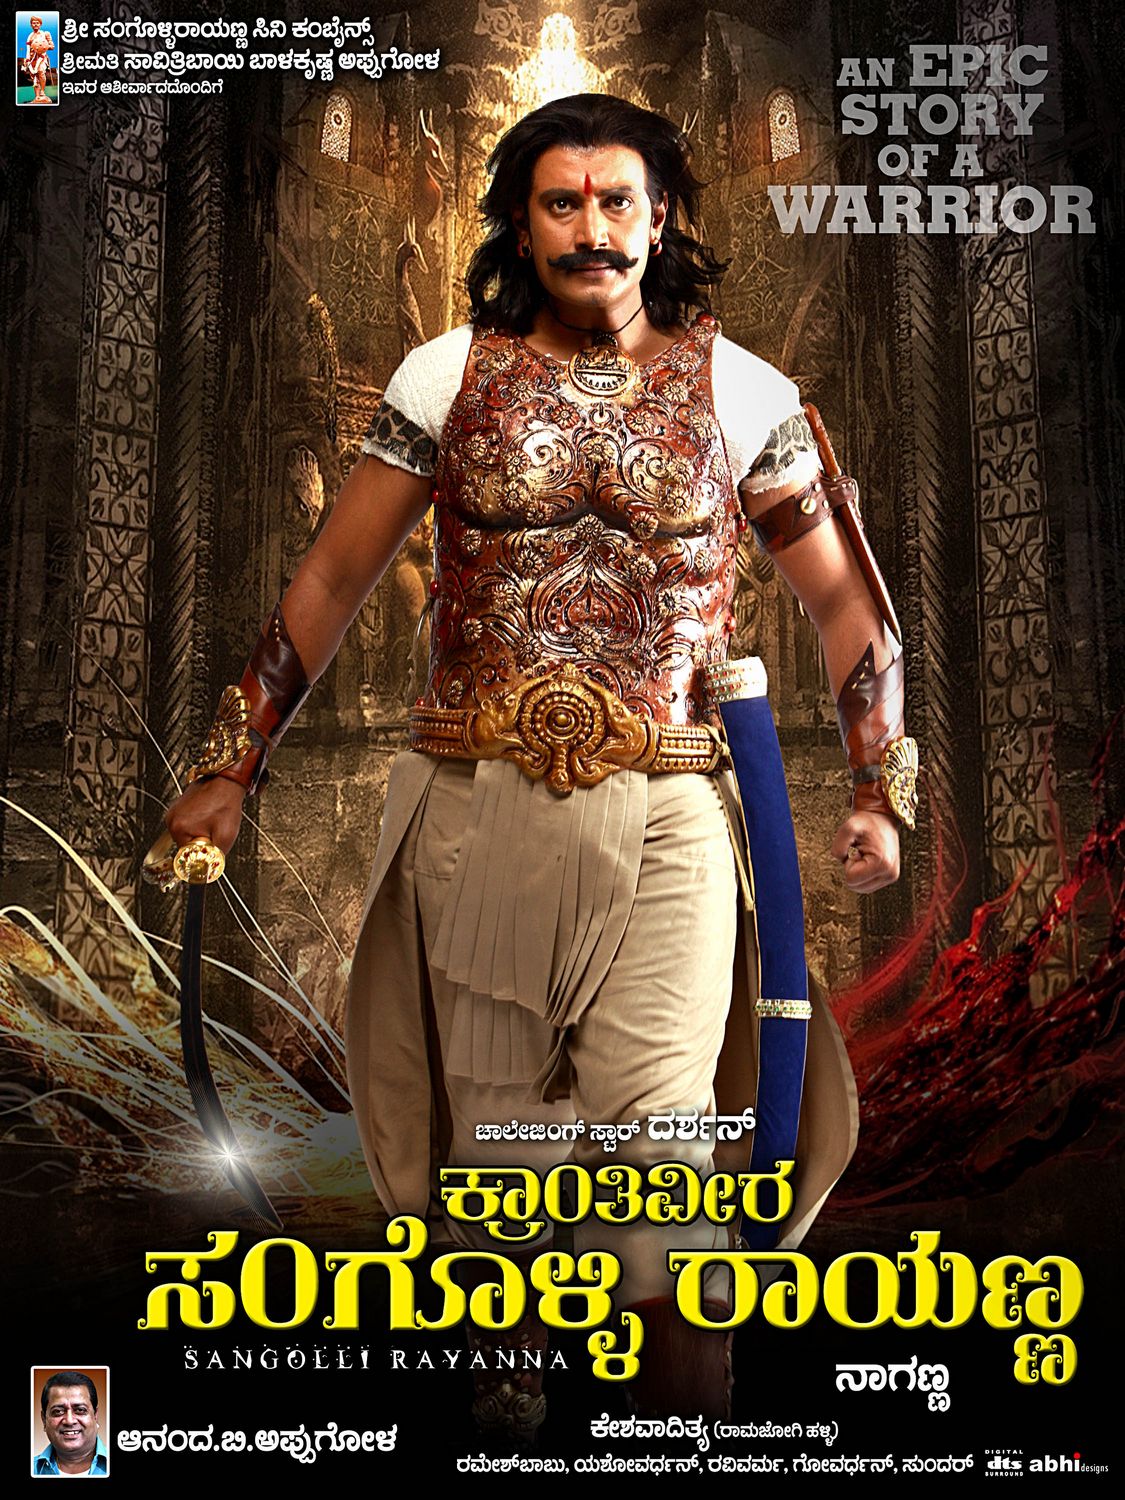 Extra Large Movie Poster Image for Sangolli Rayanna (#5 of 79)